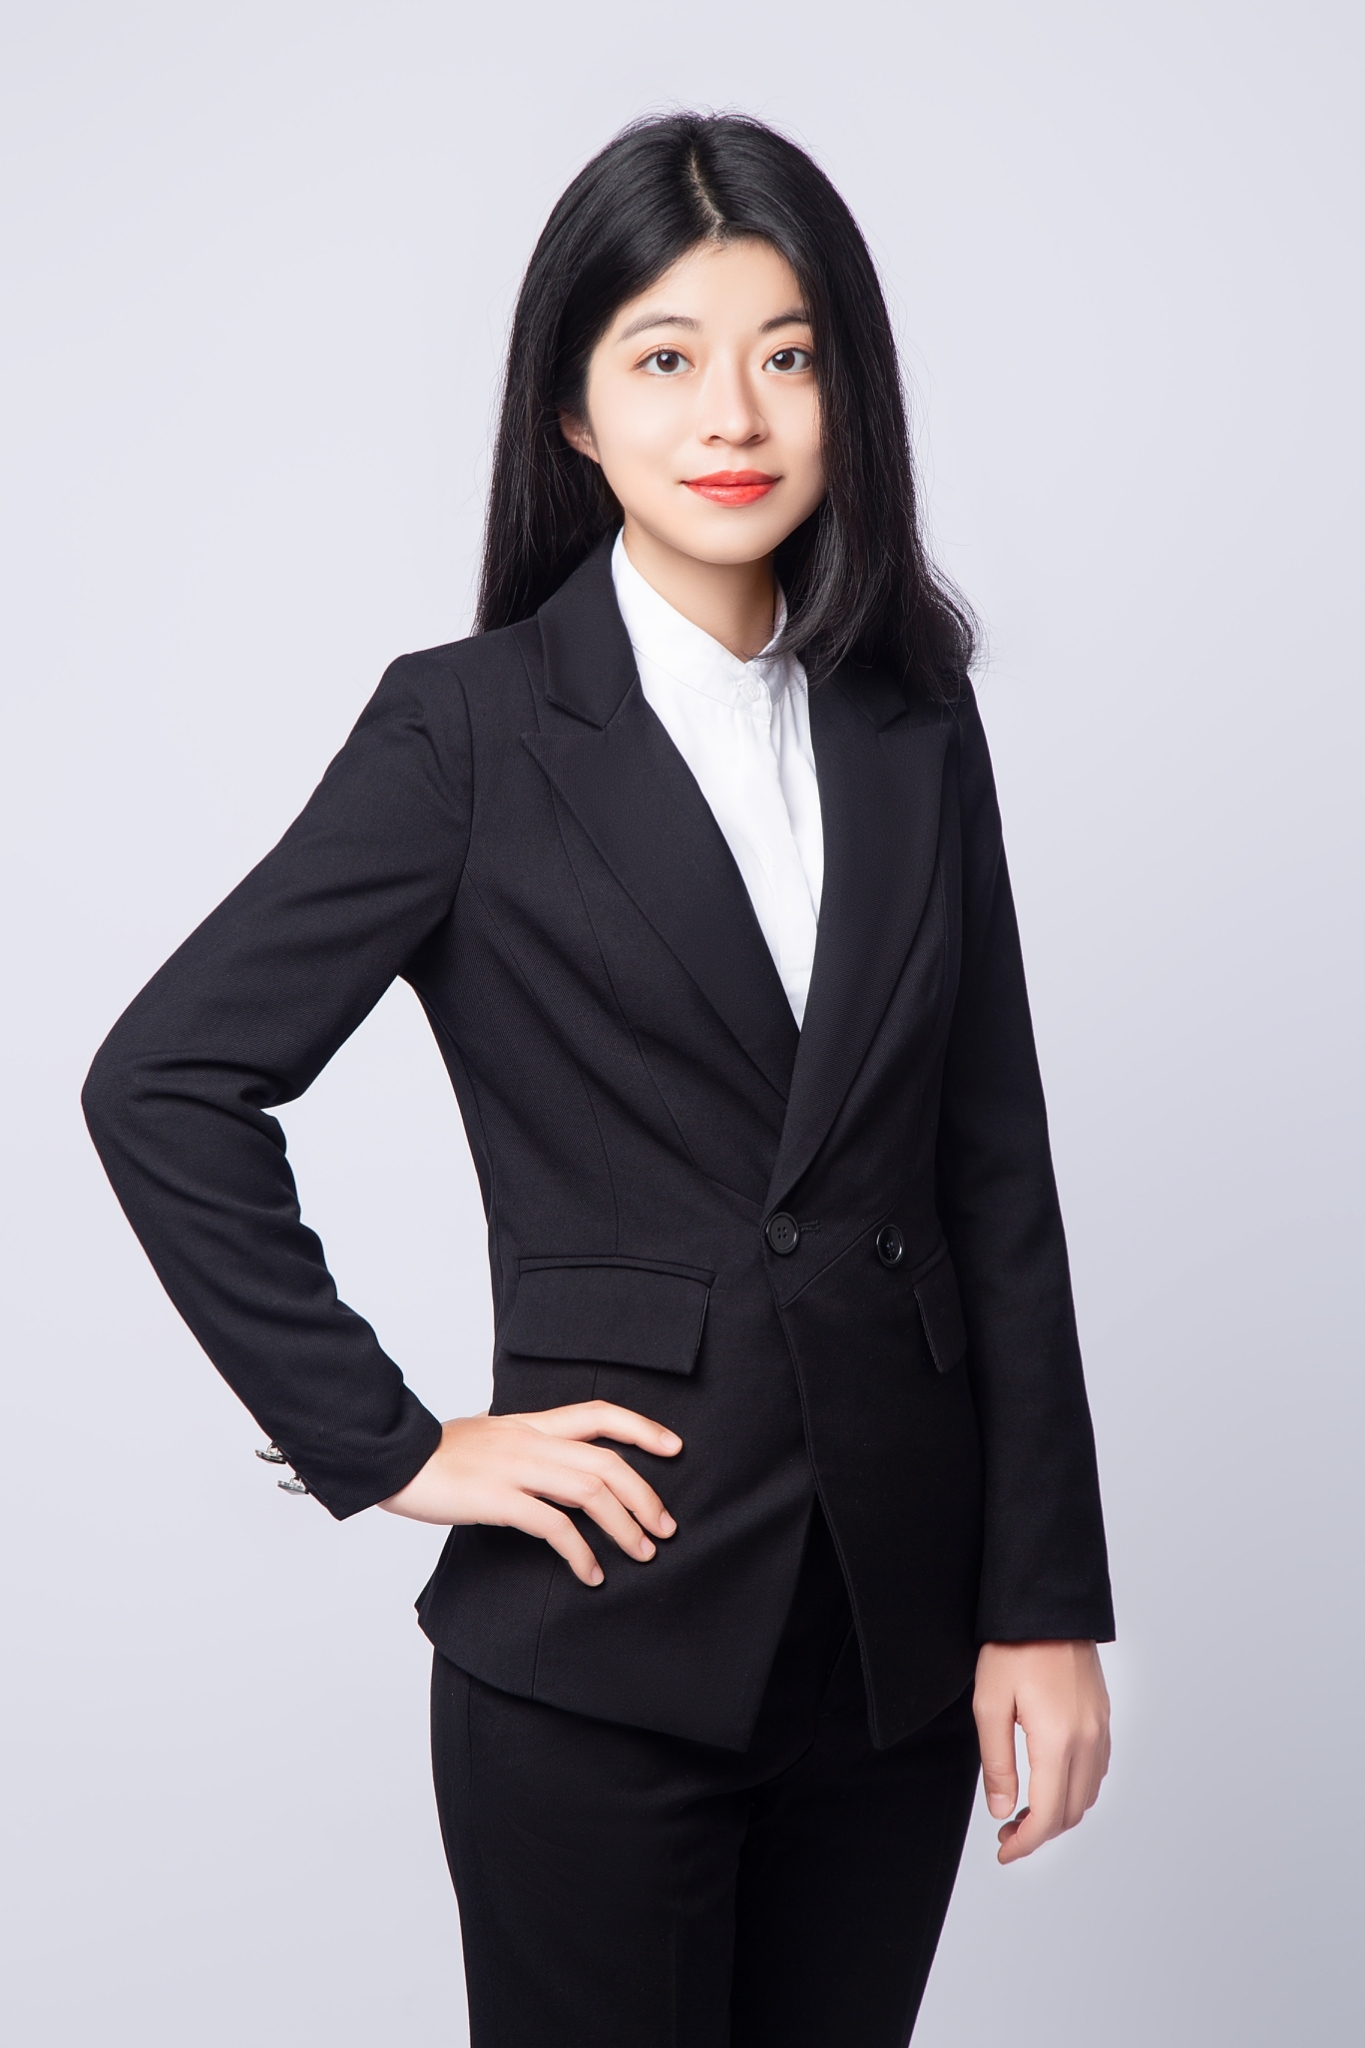 CHINGCHENG ATTORNEY AT LAW